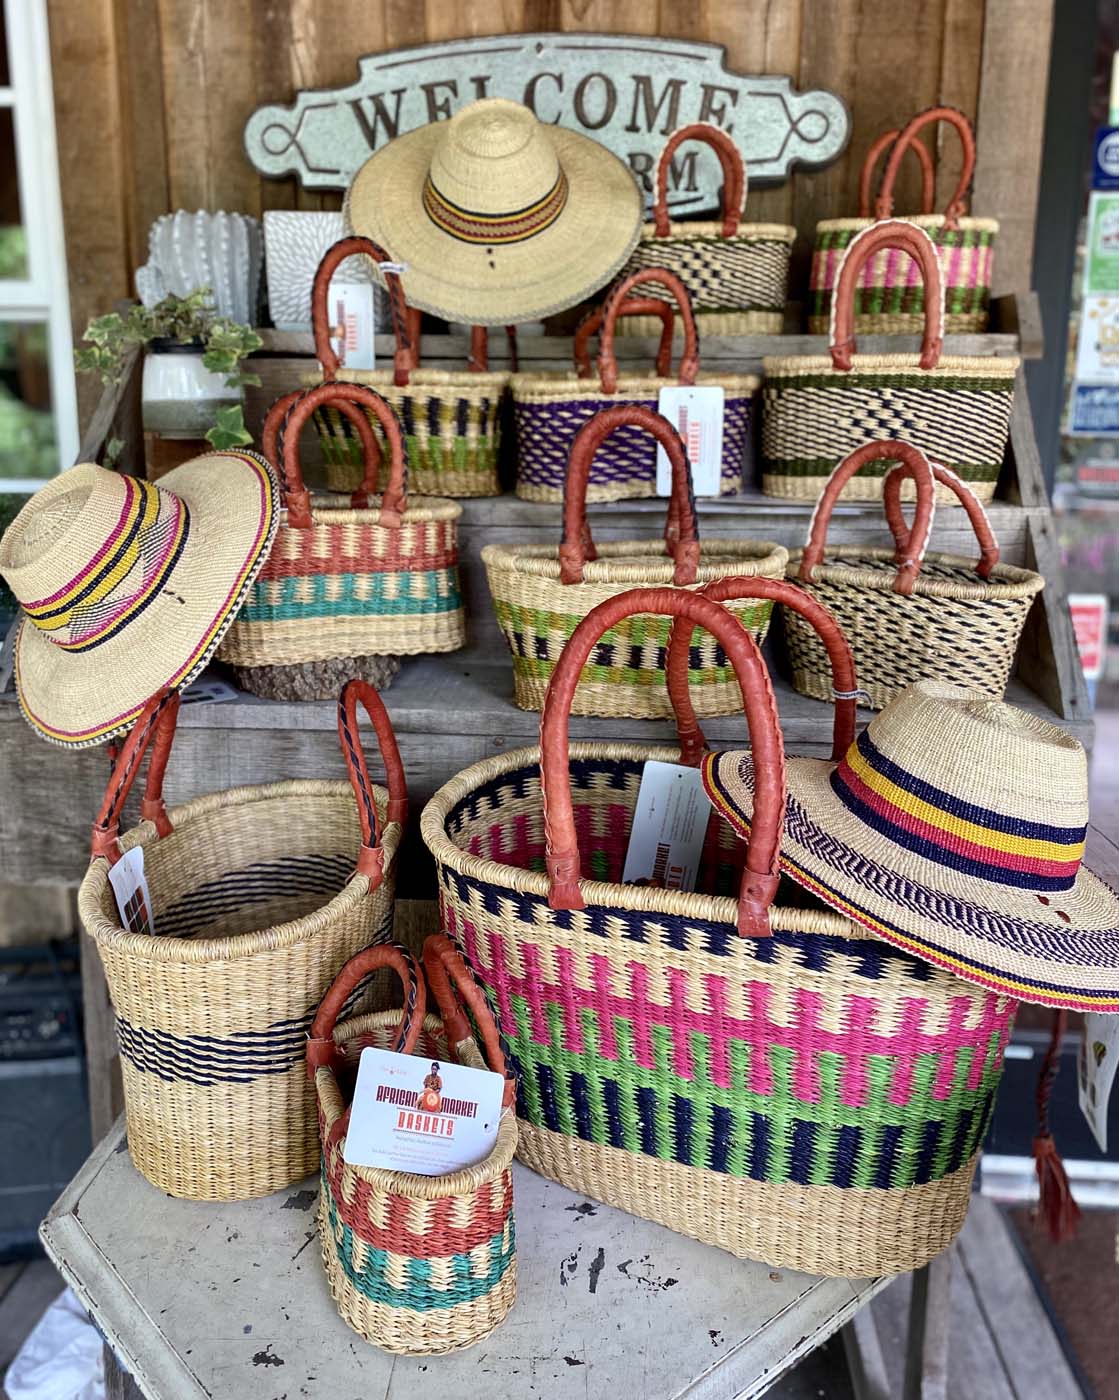 Baskets adapt to any type of display